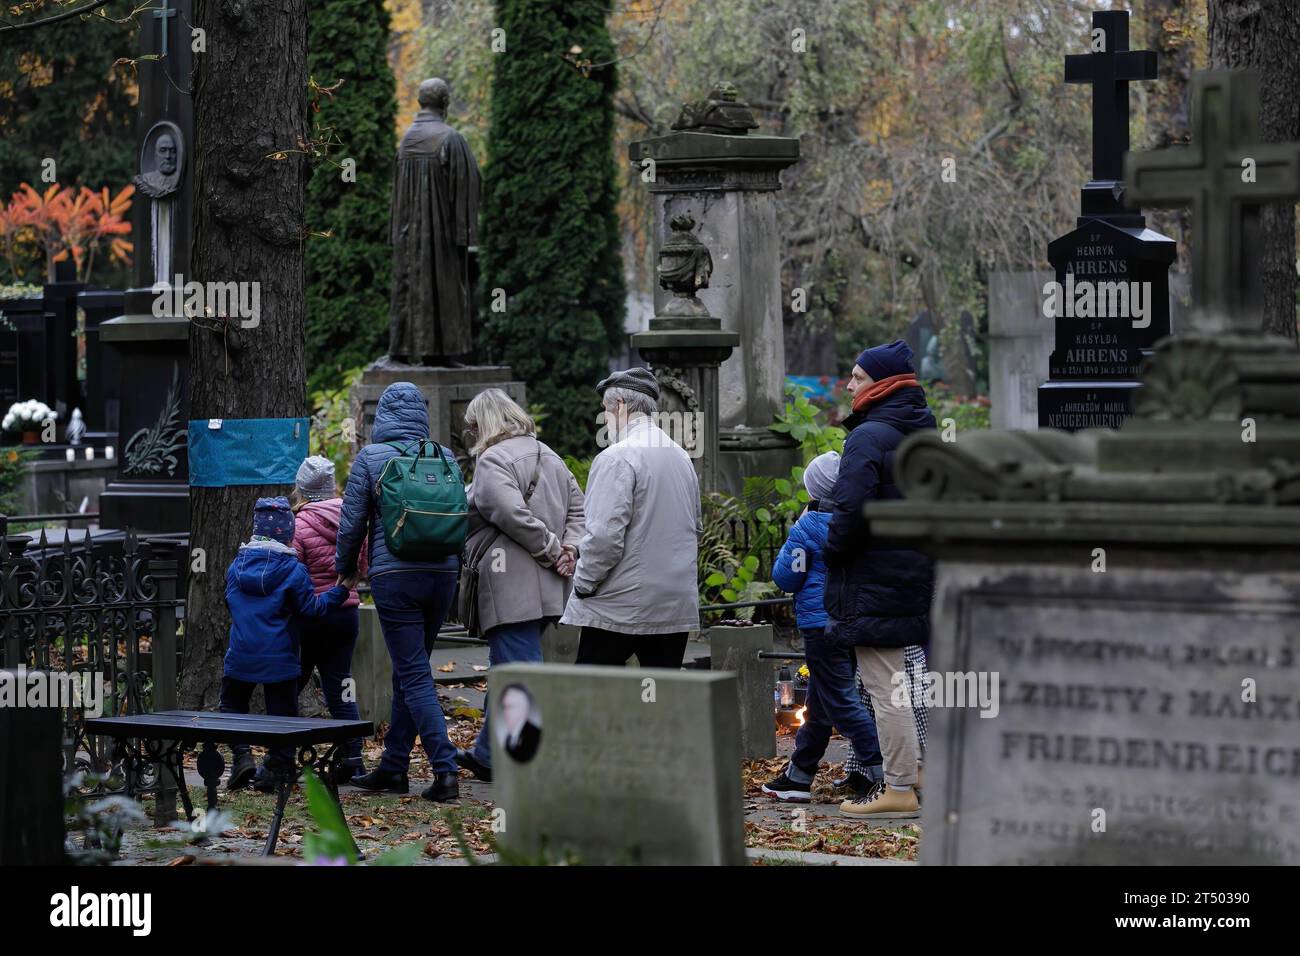 People take a walk through the cemetery on All Saints' Day at the Evangelical-Augsburg Cemetery in Warsaw. All Saints' Day (or Dzie? Zaduszny in Polish) is a public holiday in Poland. It is an opportunity to remember deceased relatives. On this day, people bring flowers, typically chrysanthemums, and candles to cemeteries. The entire cemetery is filled with lights in the darkness. The Evangelical-Augsburg Cemetery is a historic Lutheran Protestant cemetery located in the western part of Warsaw. Since its opening in 1792, more than 100,000 people have been buried there. (Photo by Volha Shukaila Stock Photo